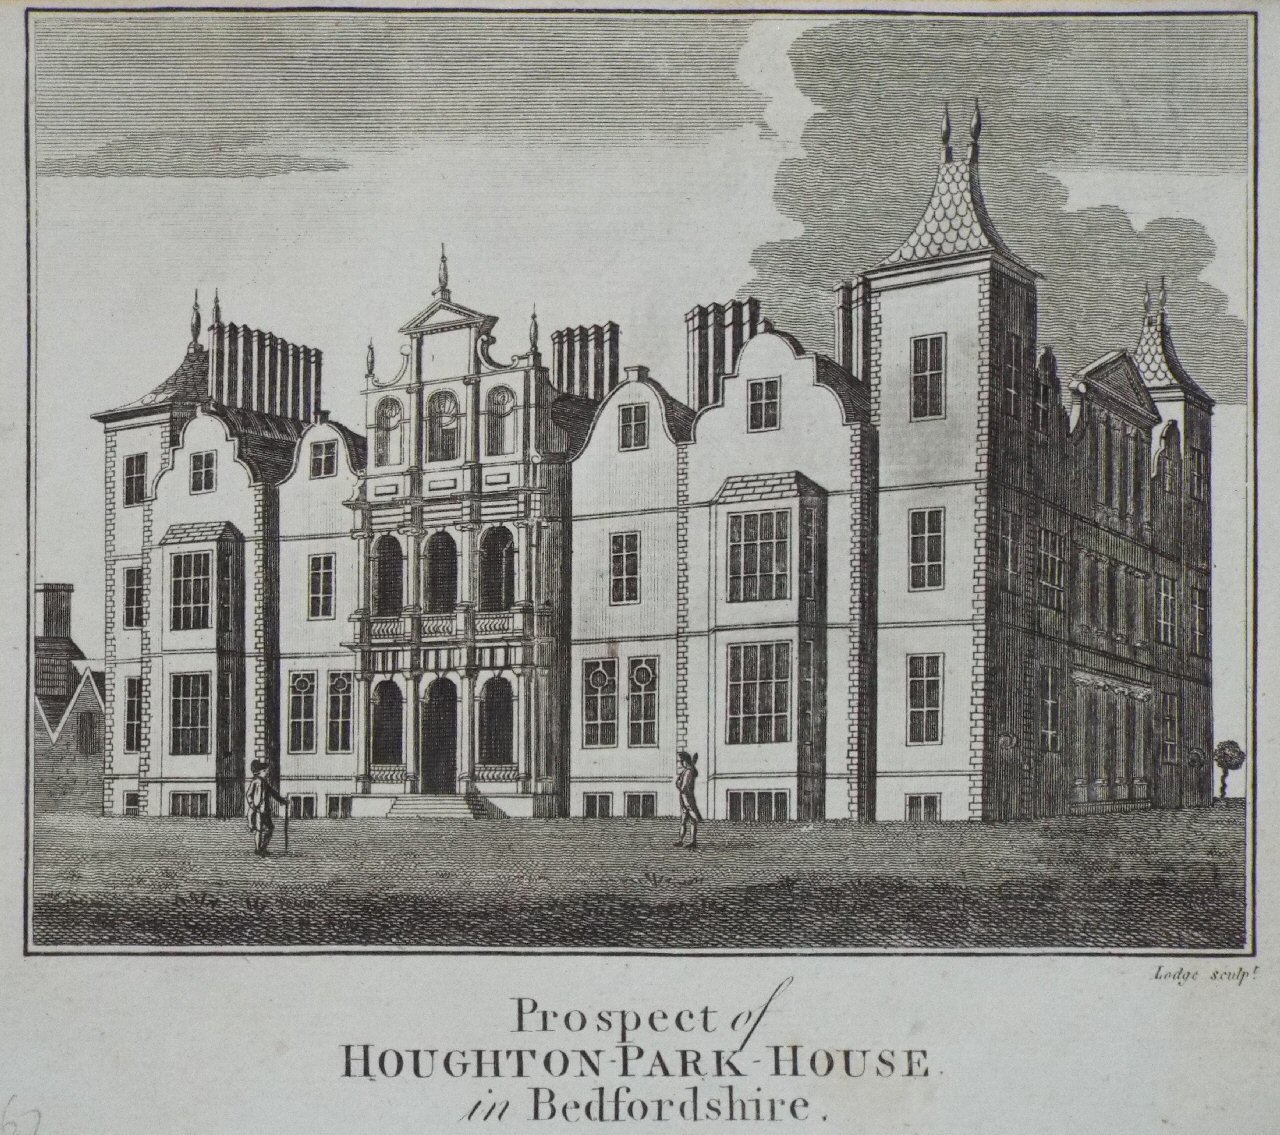 Print - Prospect of Houghton-Park-House, in Bedfordshire. - 